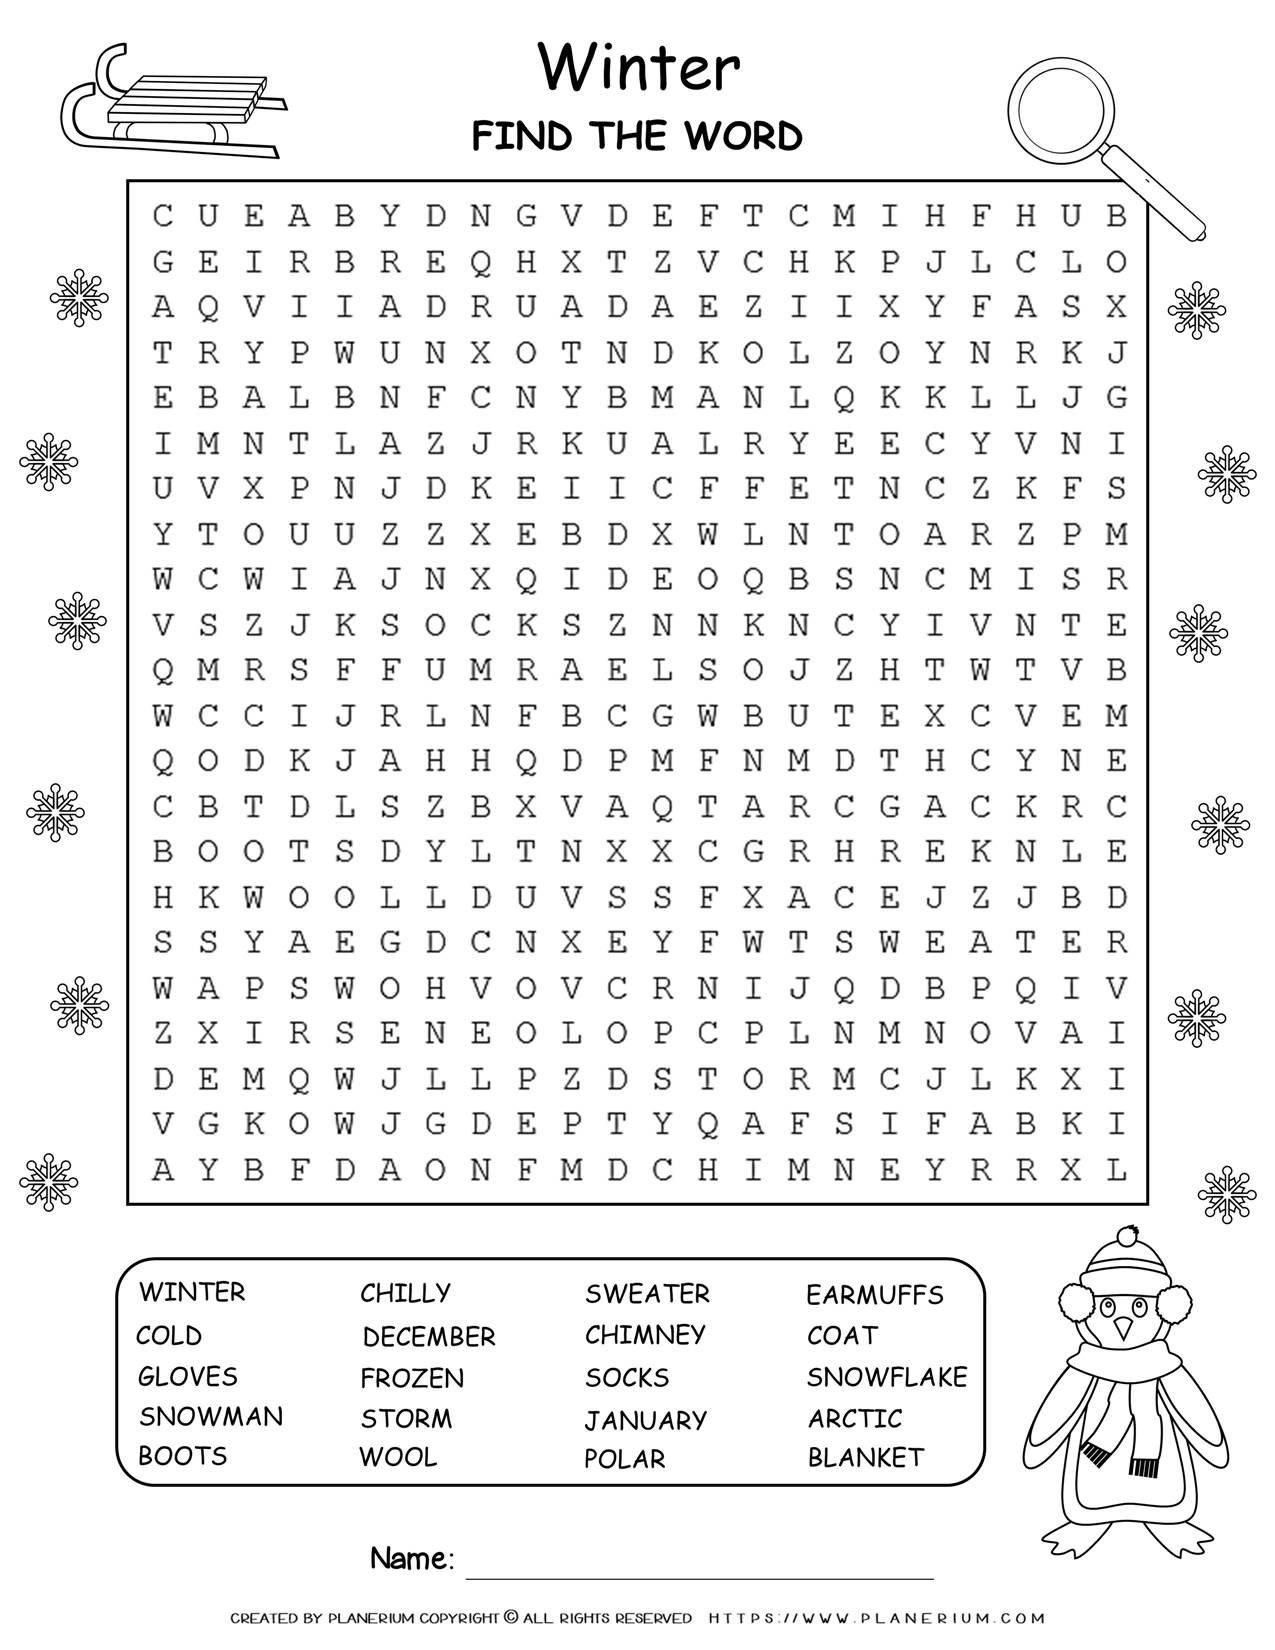 Winter Word Search Free Printable